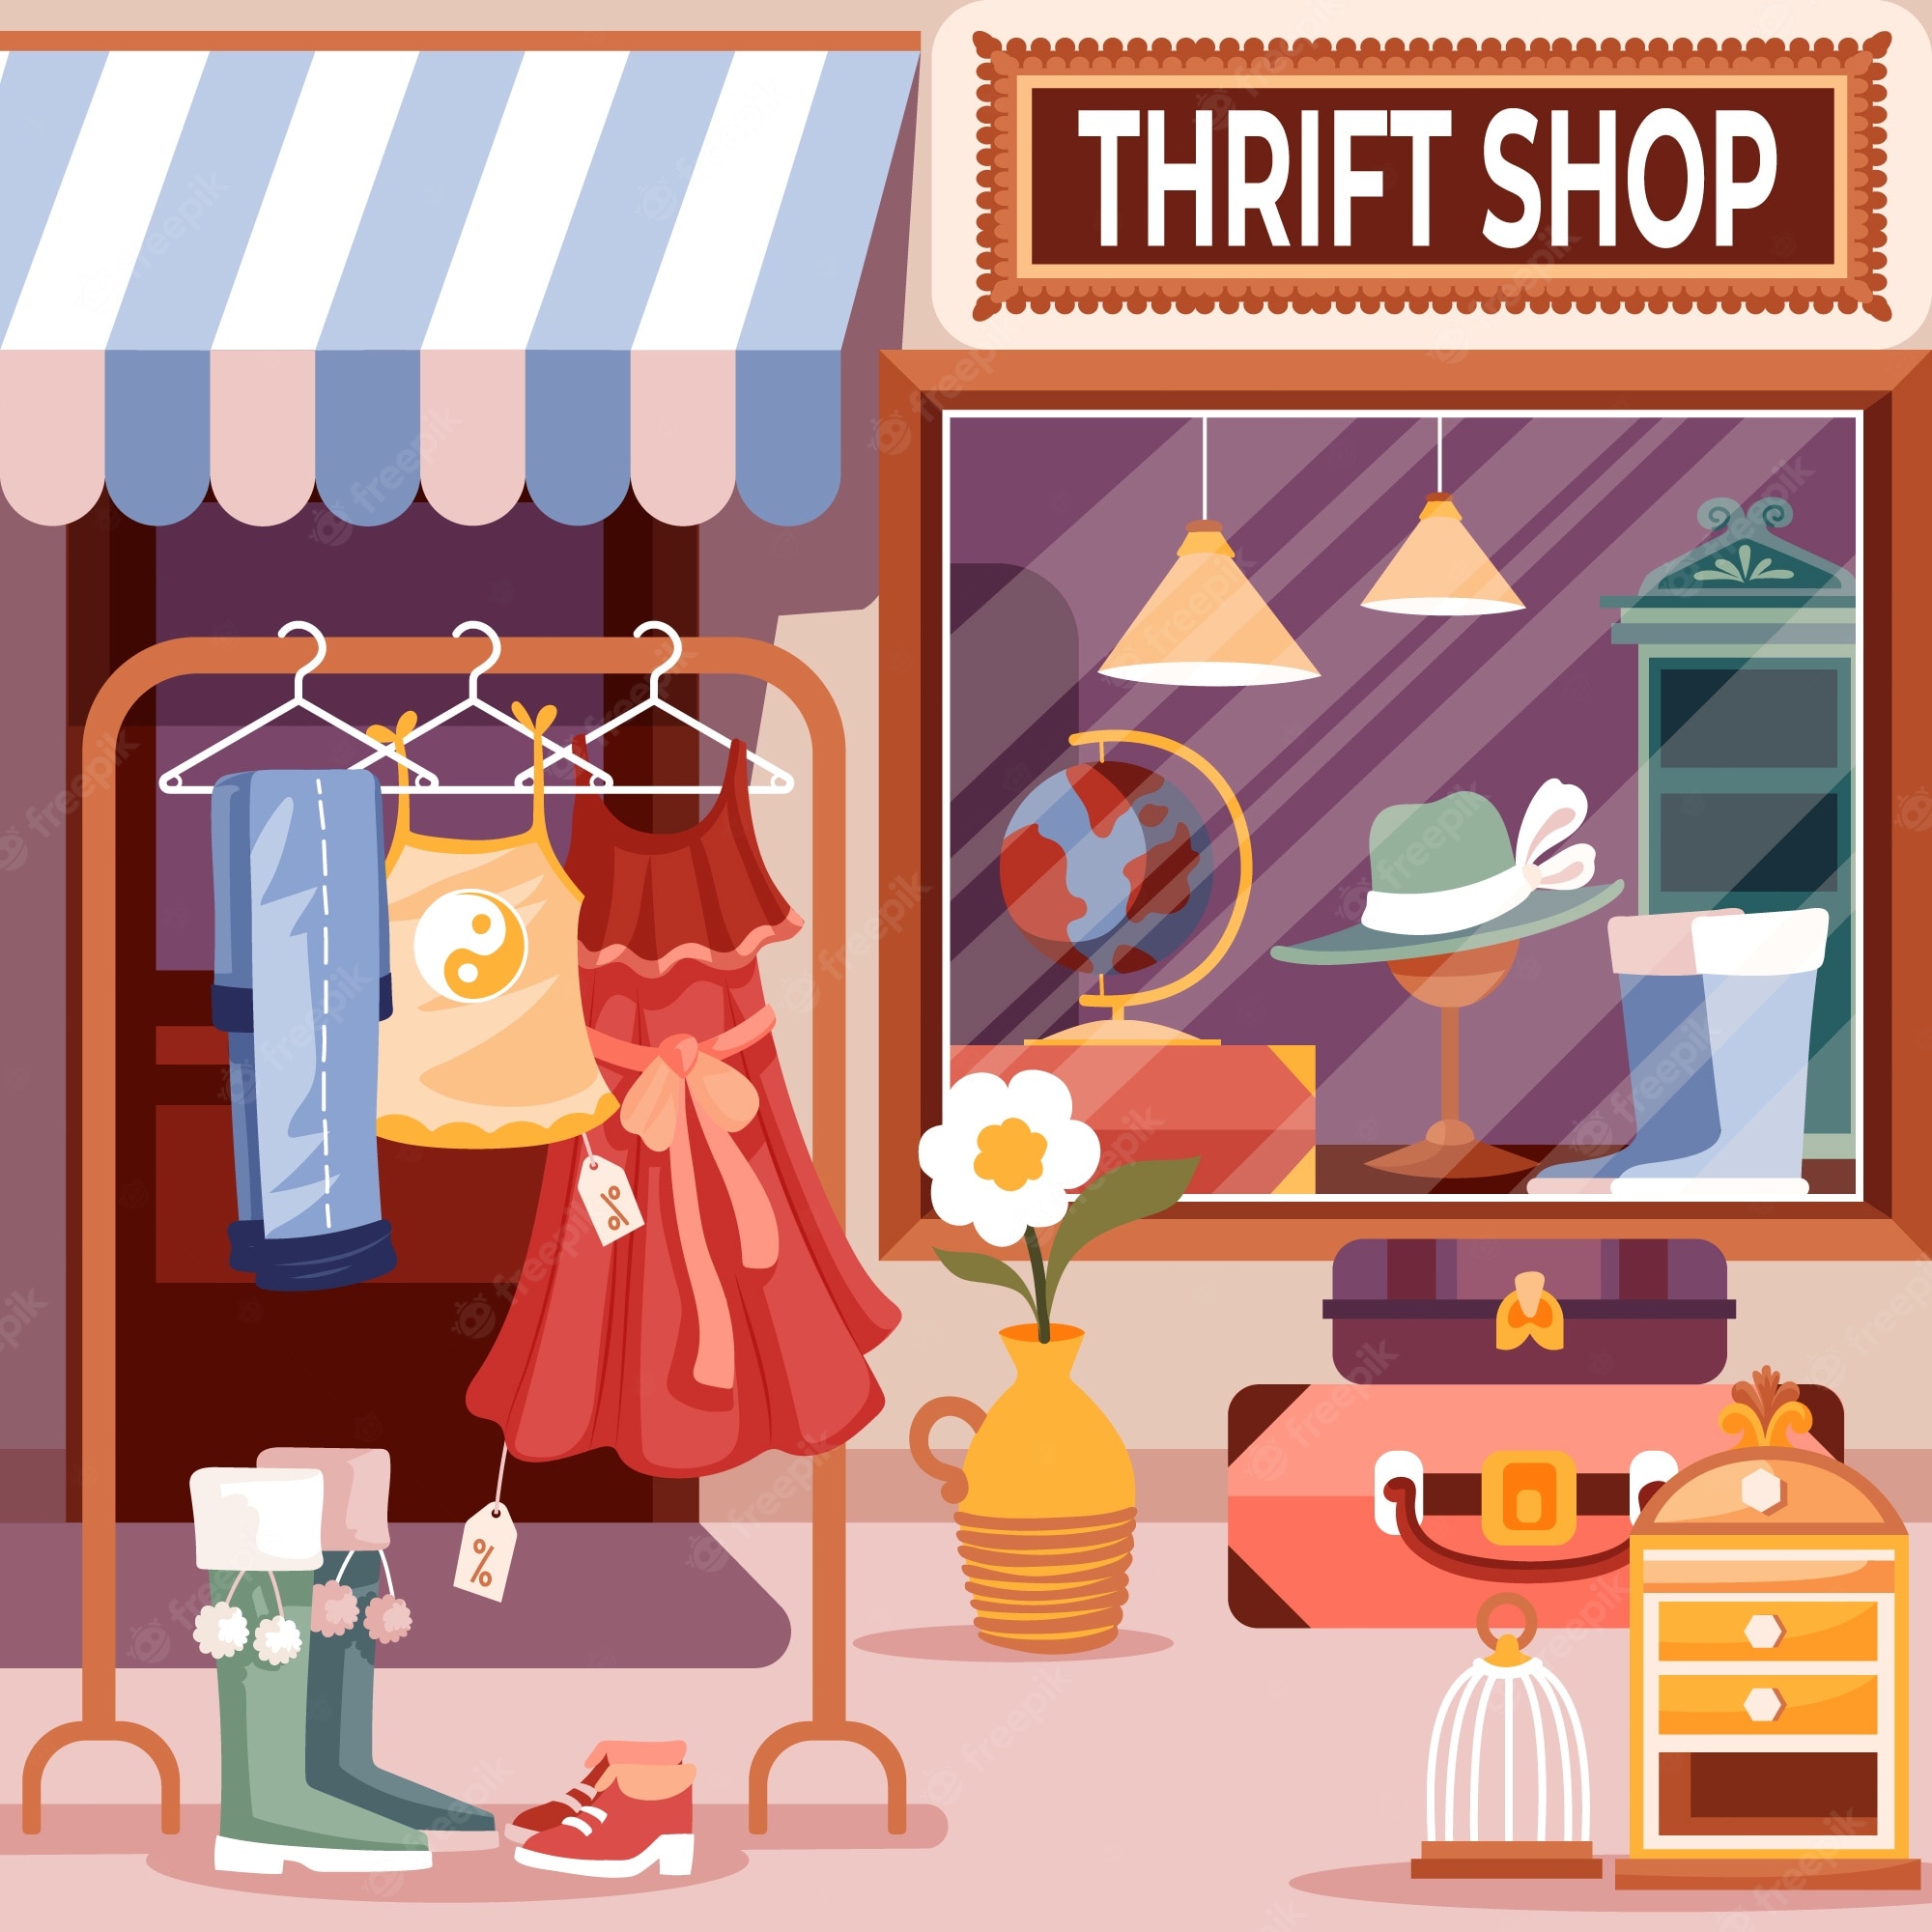 Thrift Shop Cliparts: Free Downloadable Images - Clip Art Library